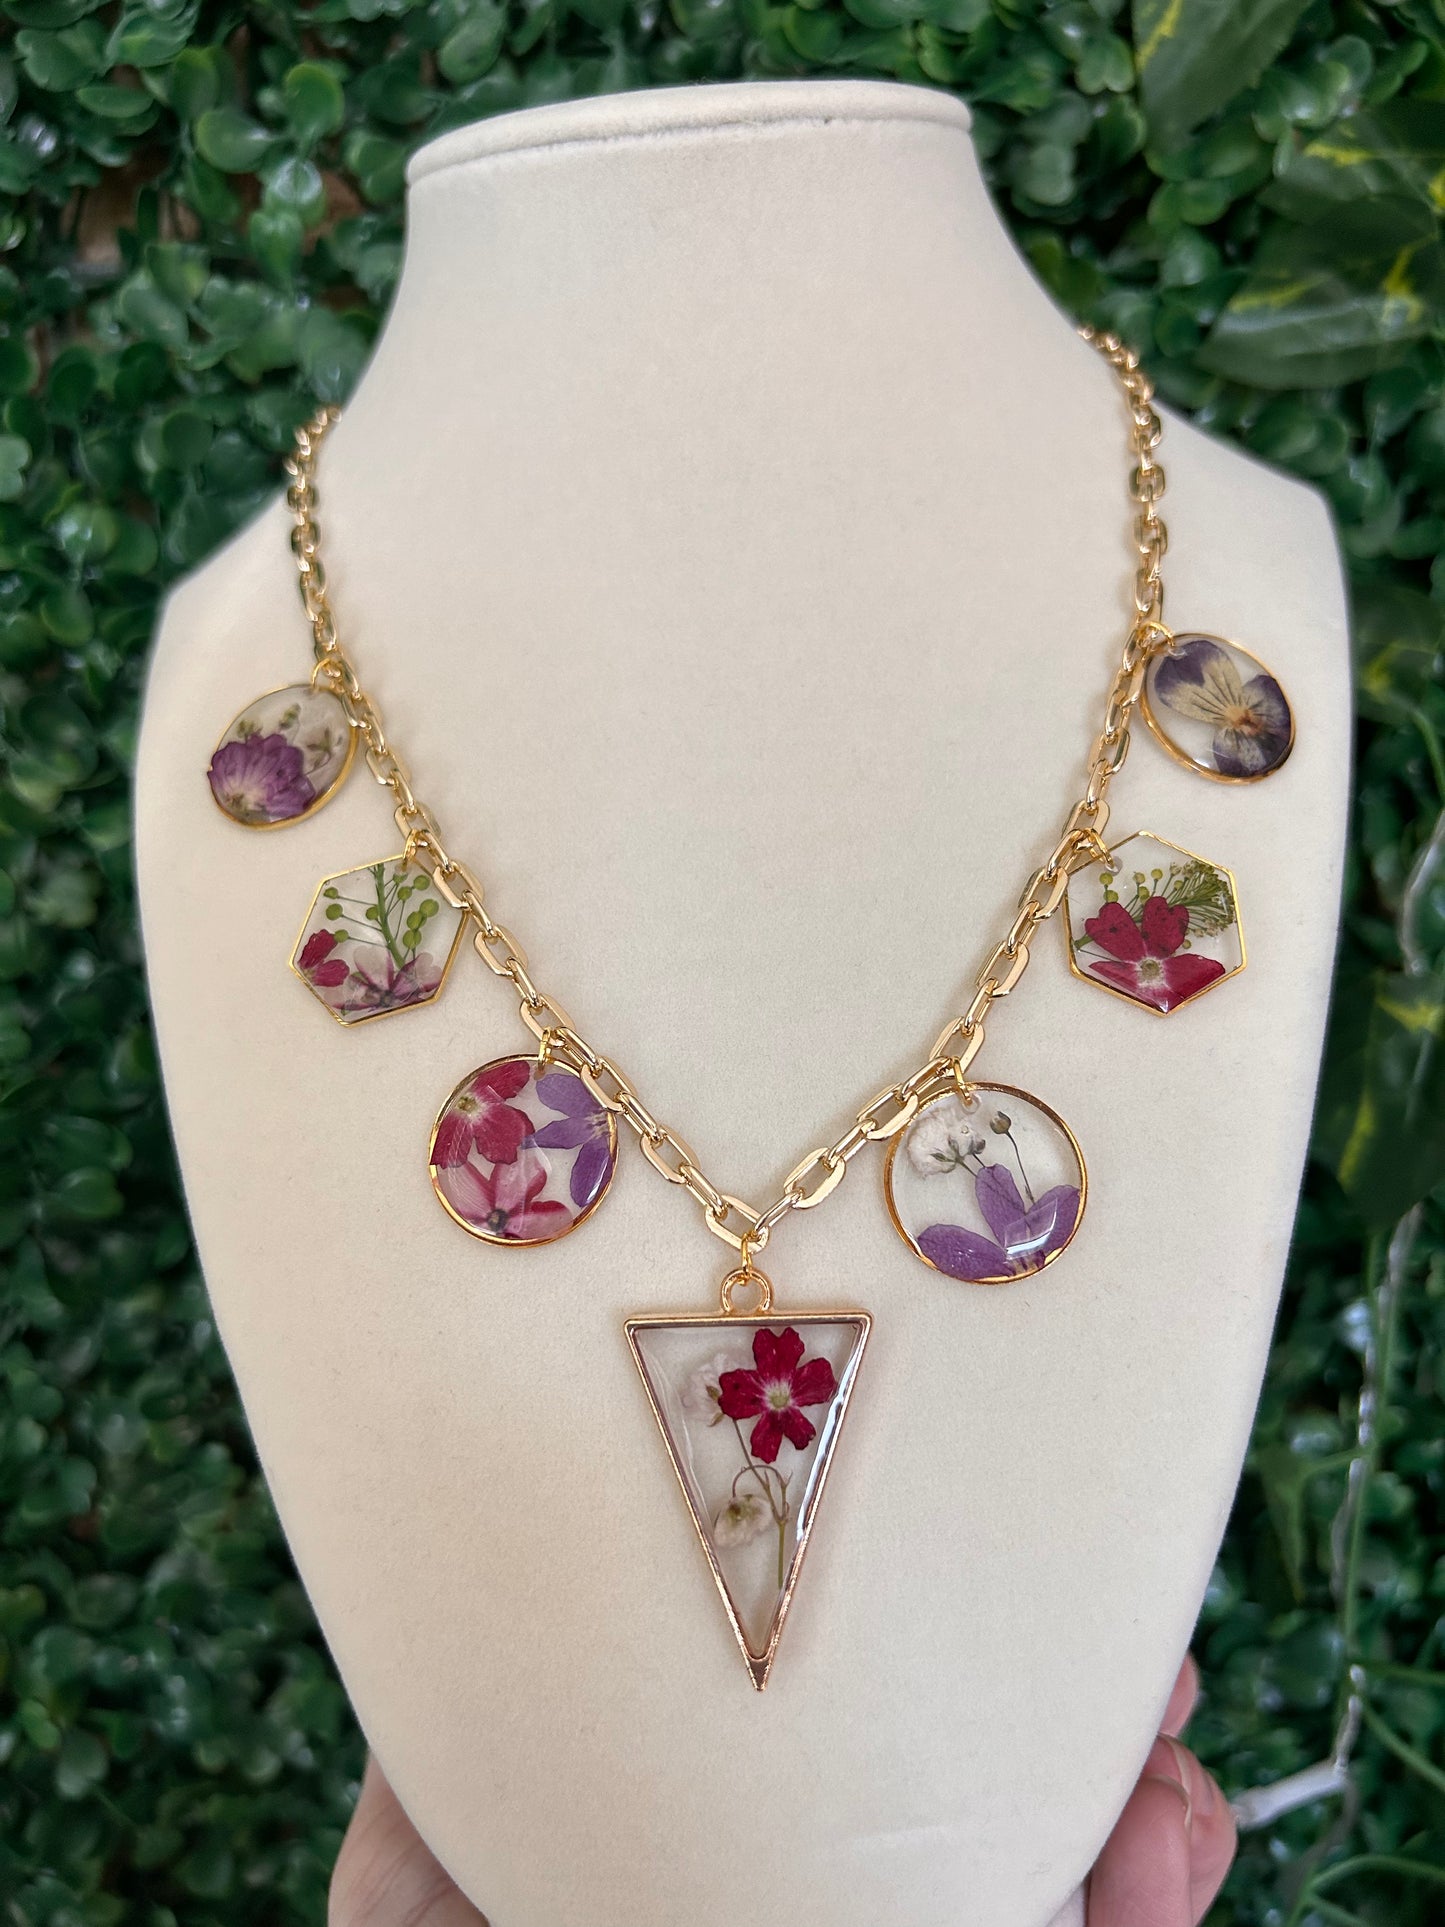 Pressed flower charm necklace (reds and purples)